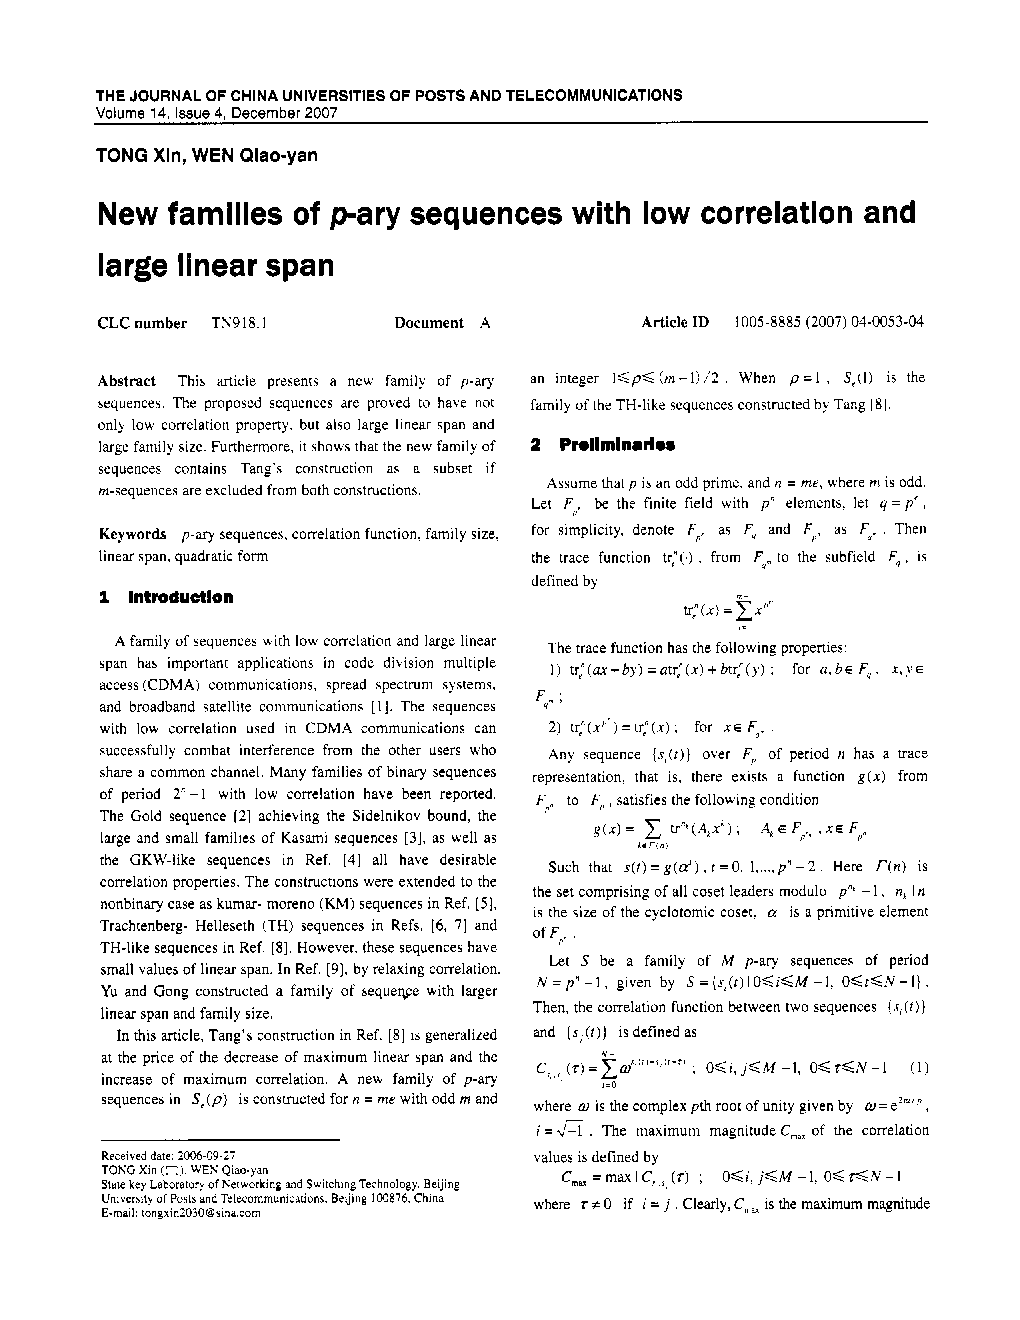 New families of p-ary sequences with low correlation and large linear span